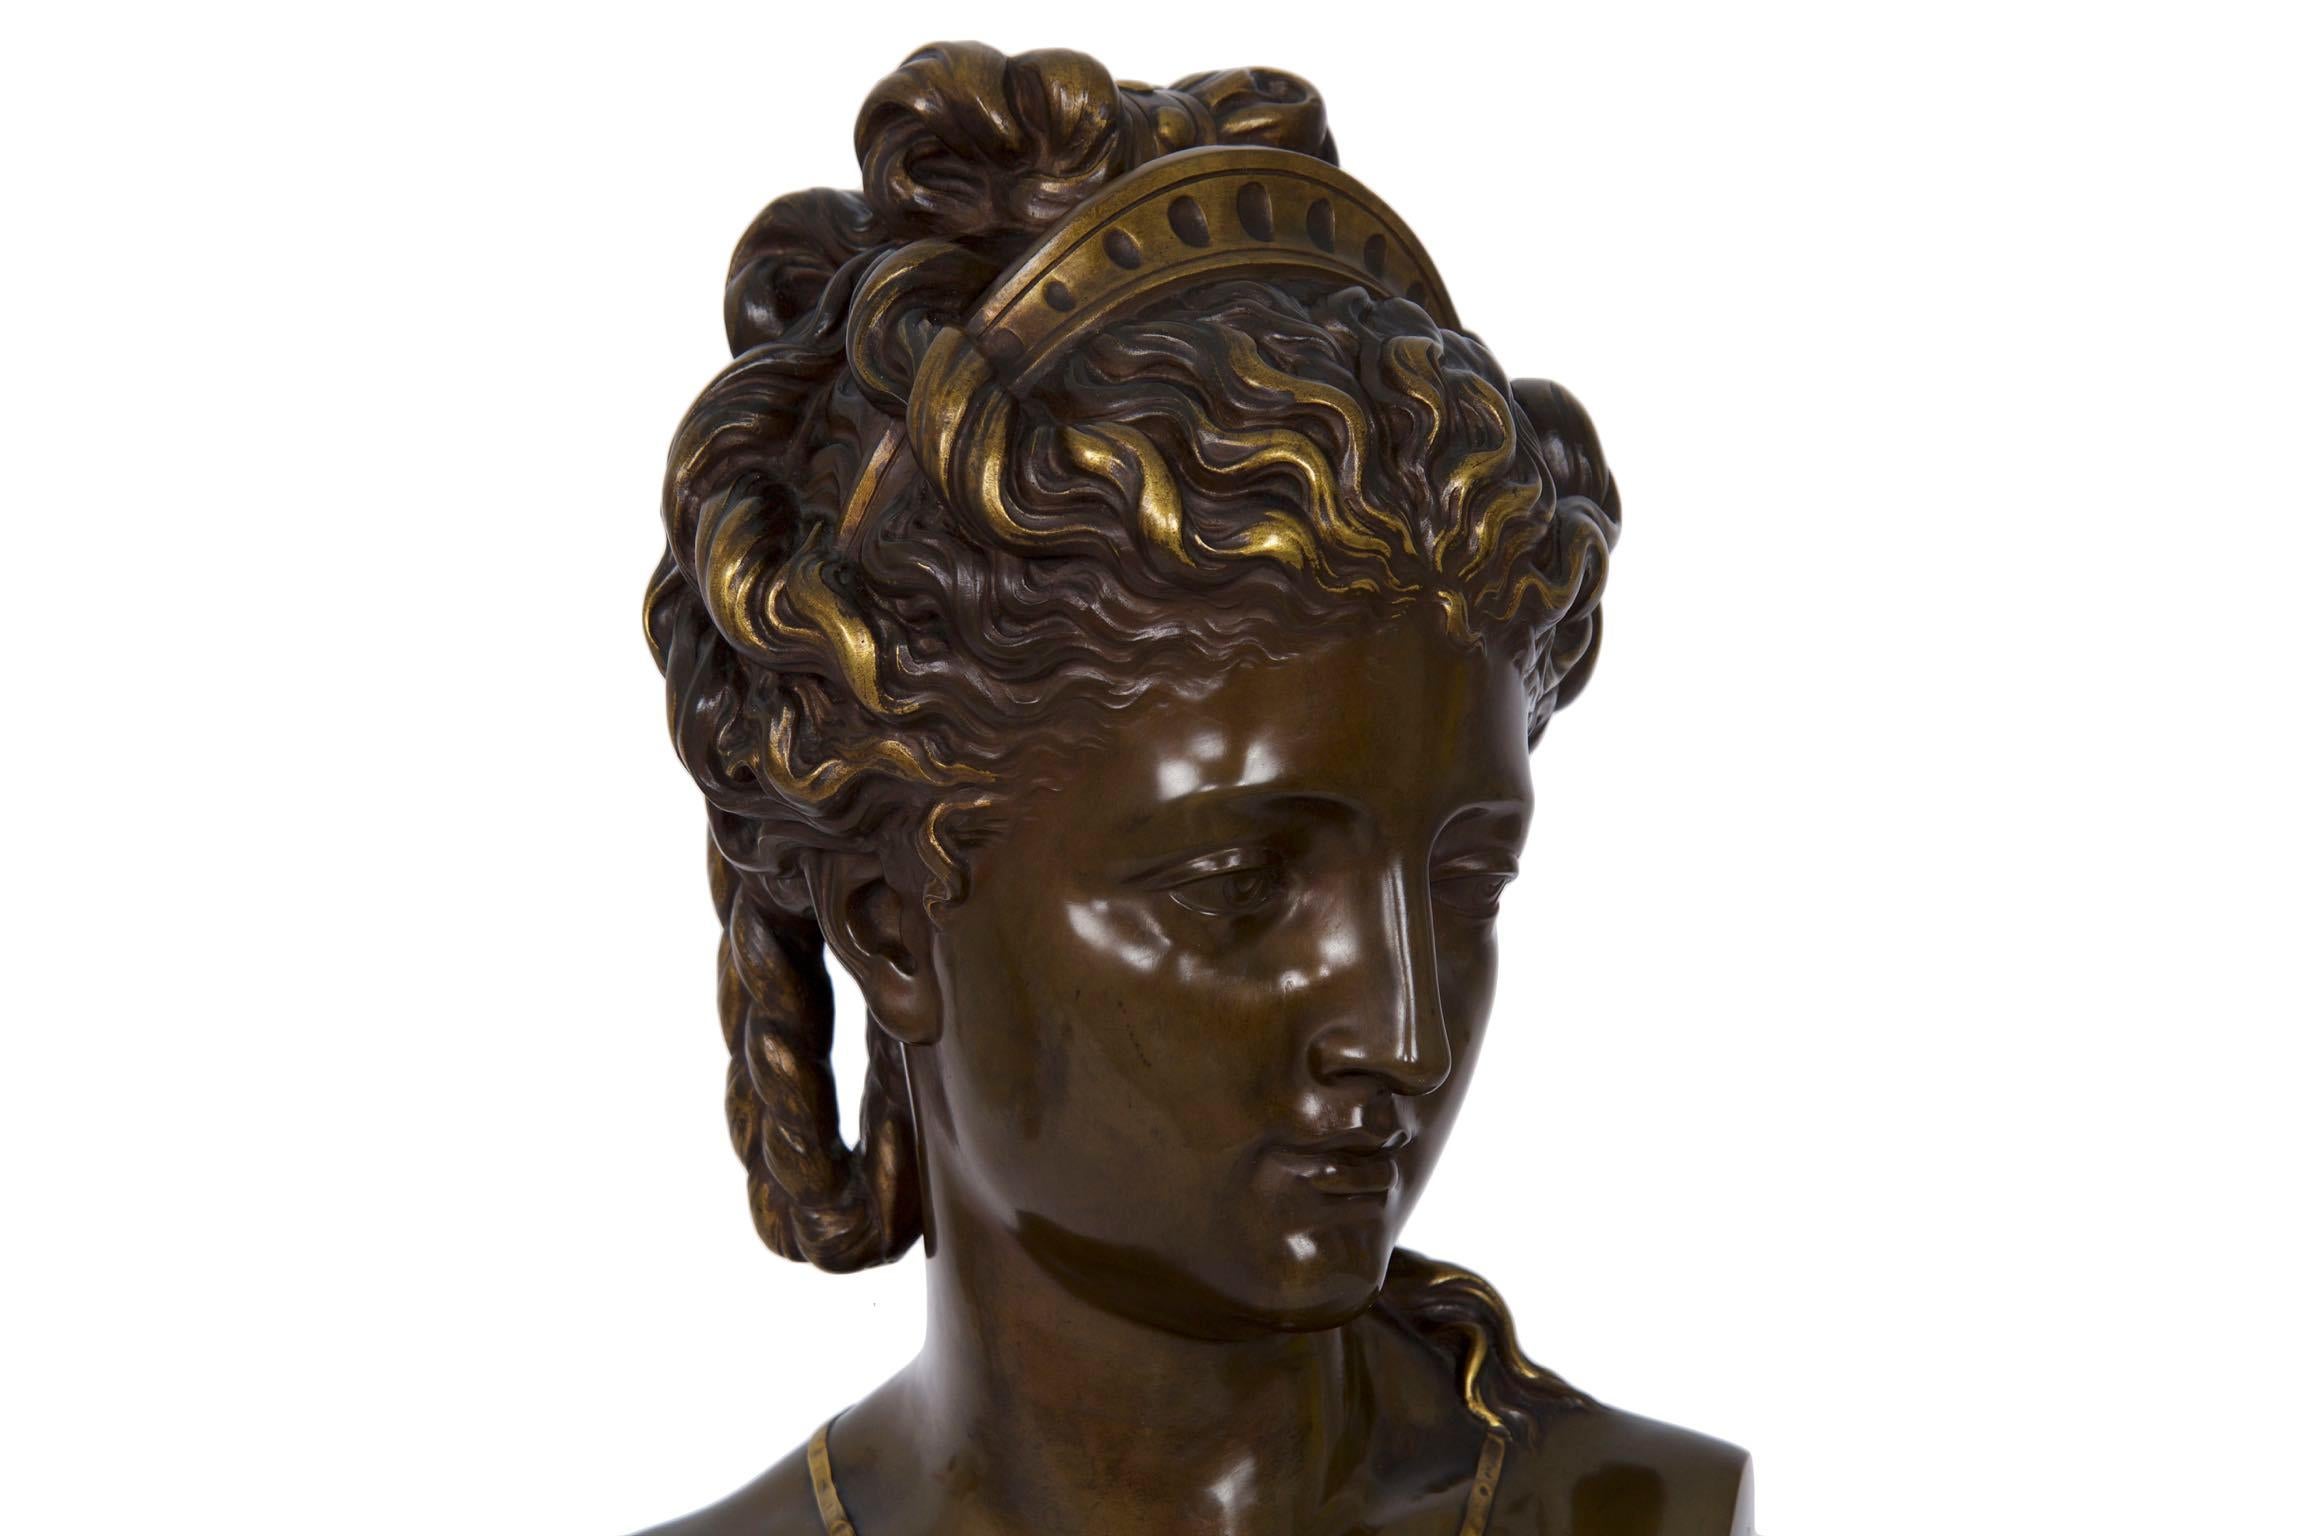 Eugene Aizelin (French, 1821-1902) bronze bust of a woman with tiara
Cast by F. Barbedienne, signed in shoulder E. Aizelin 1870, signed in back F. Barbedienne Fondeurs

A very fine bronze bust of a woman with a tiara by Eugene Aizelin, the work